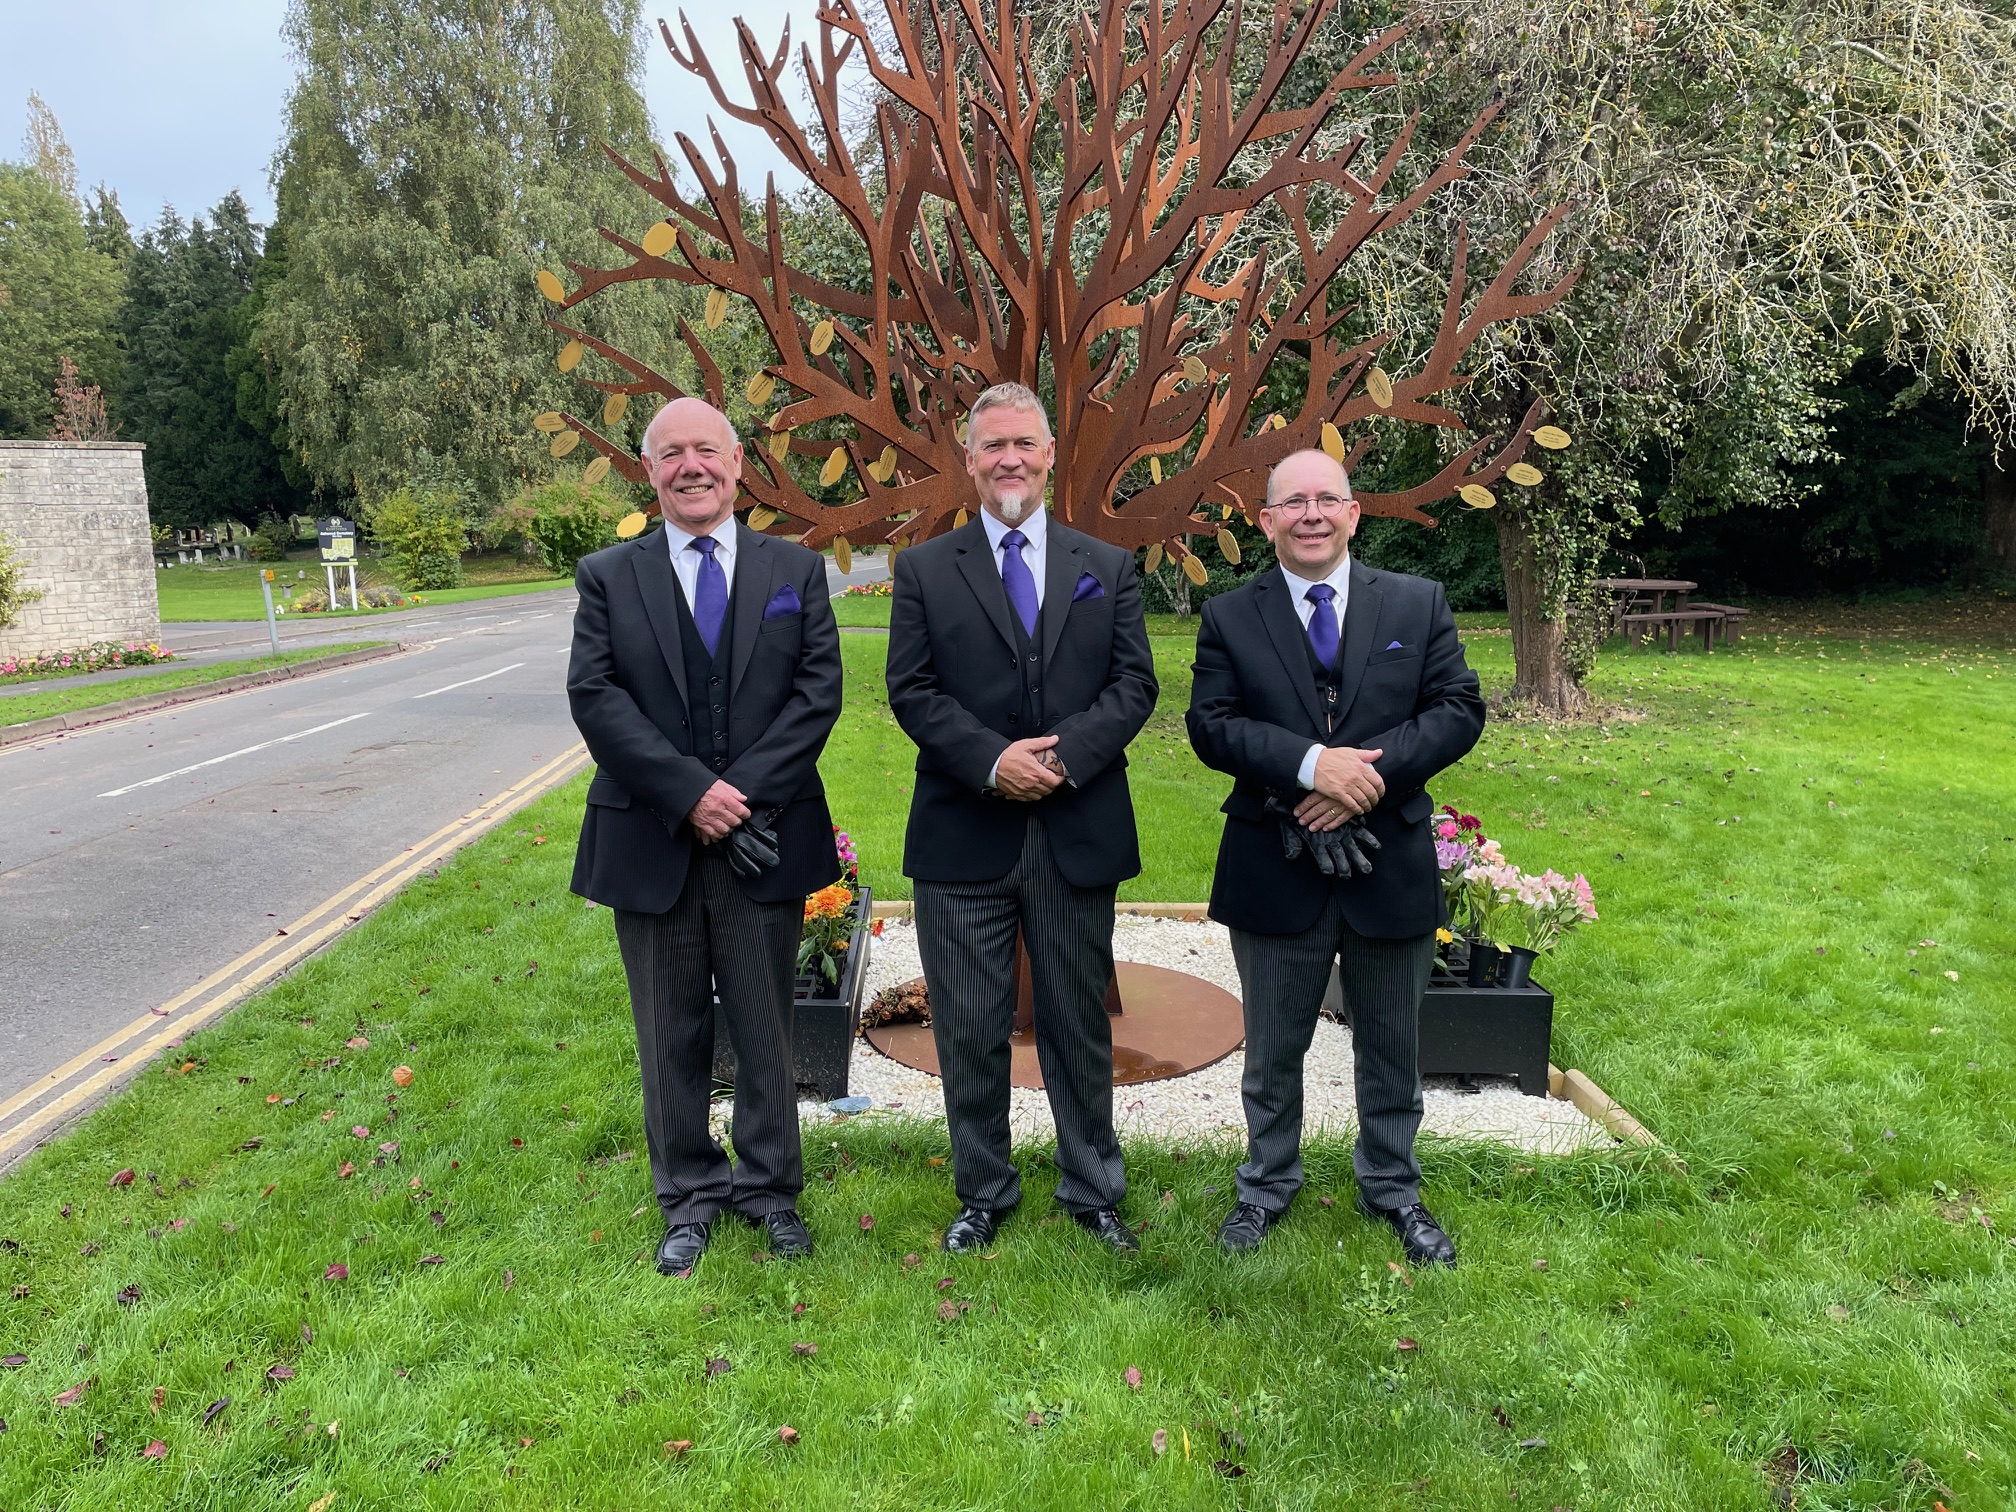 Pall bearers/coffin bearers - Worcester Funeral Home